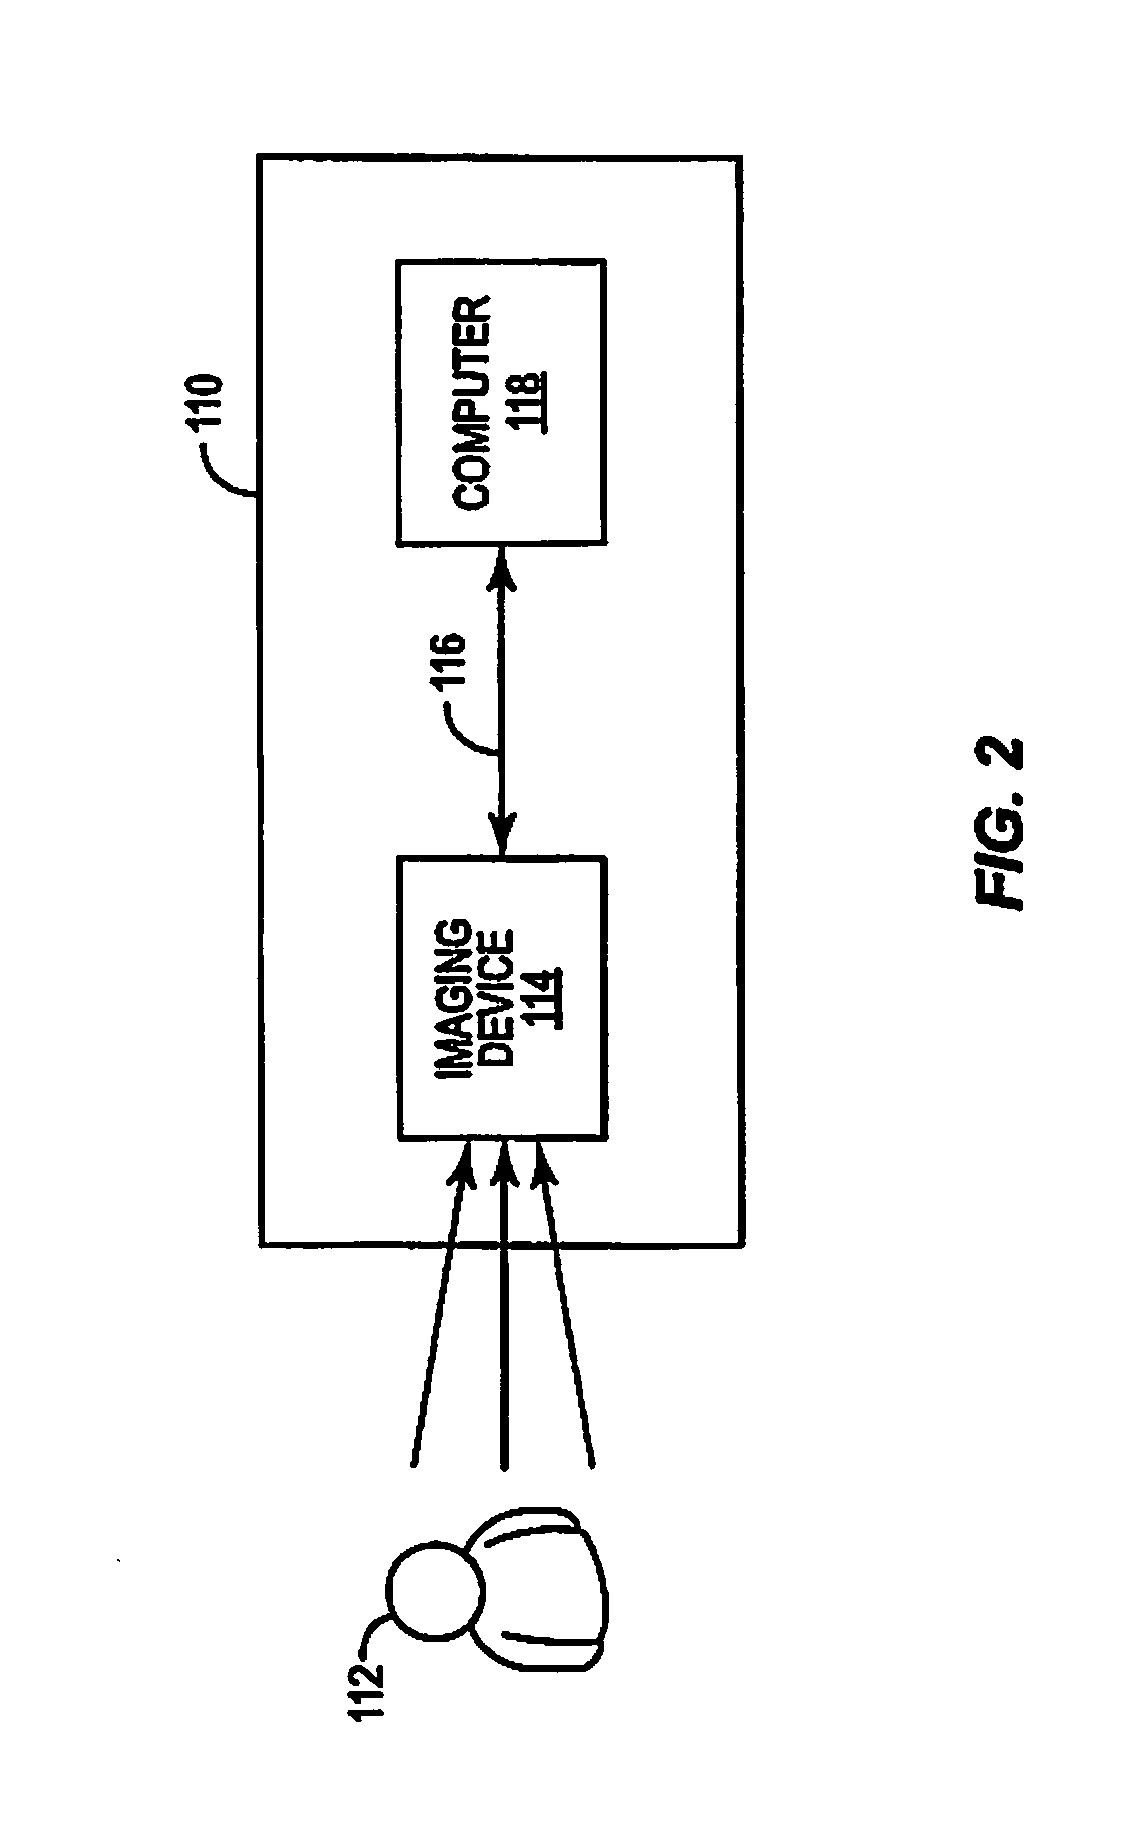 Method and apparatus for correcting aspect ratio in a camera graphical user interface